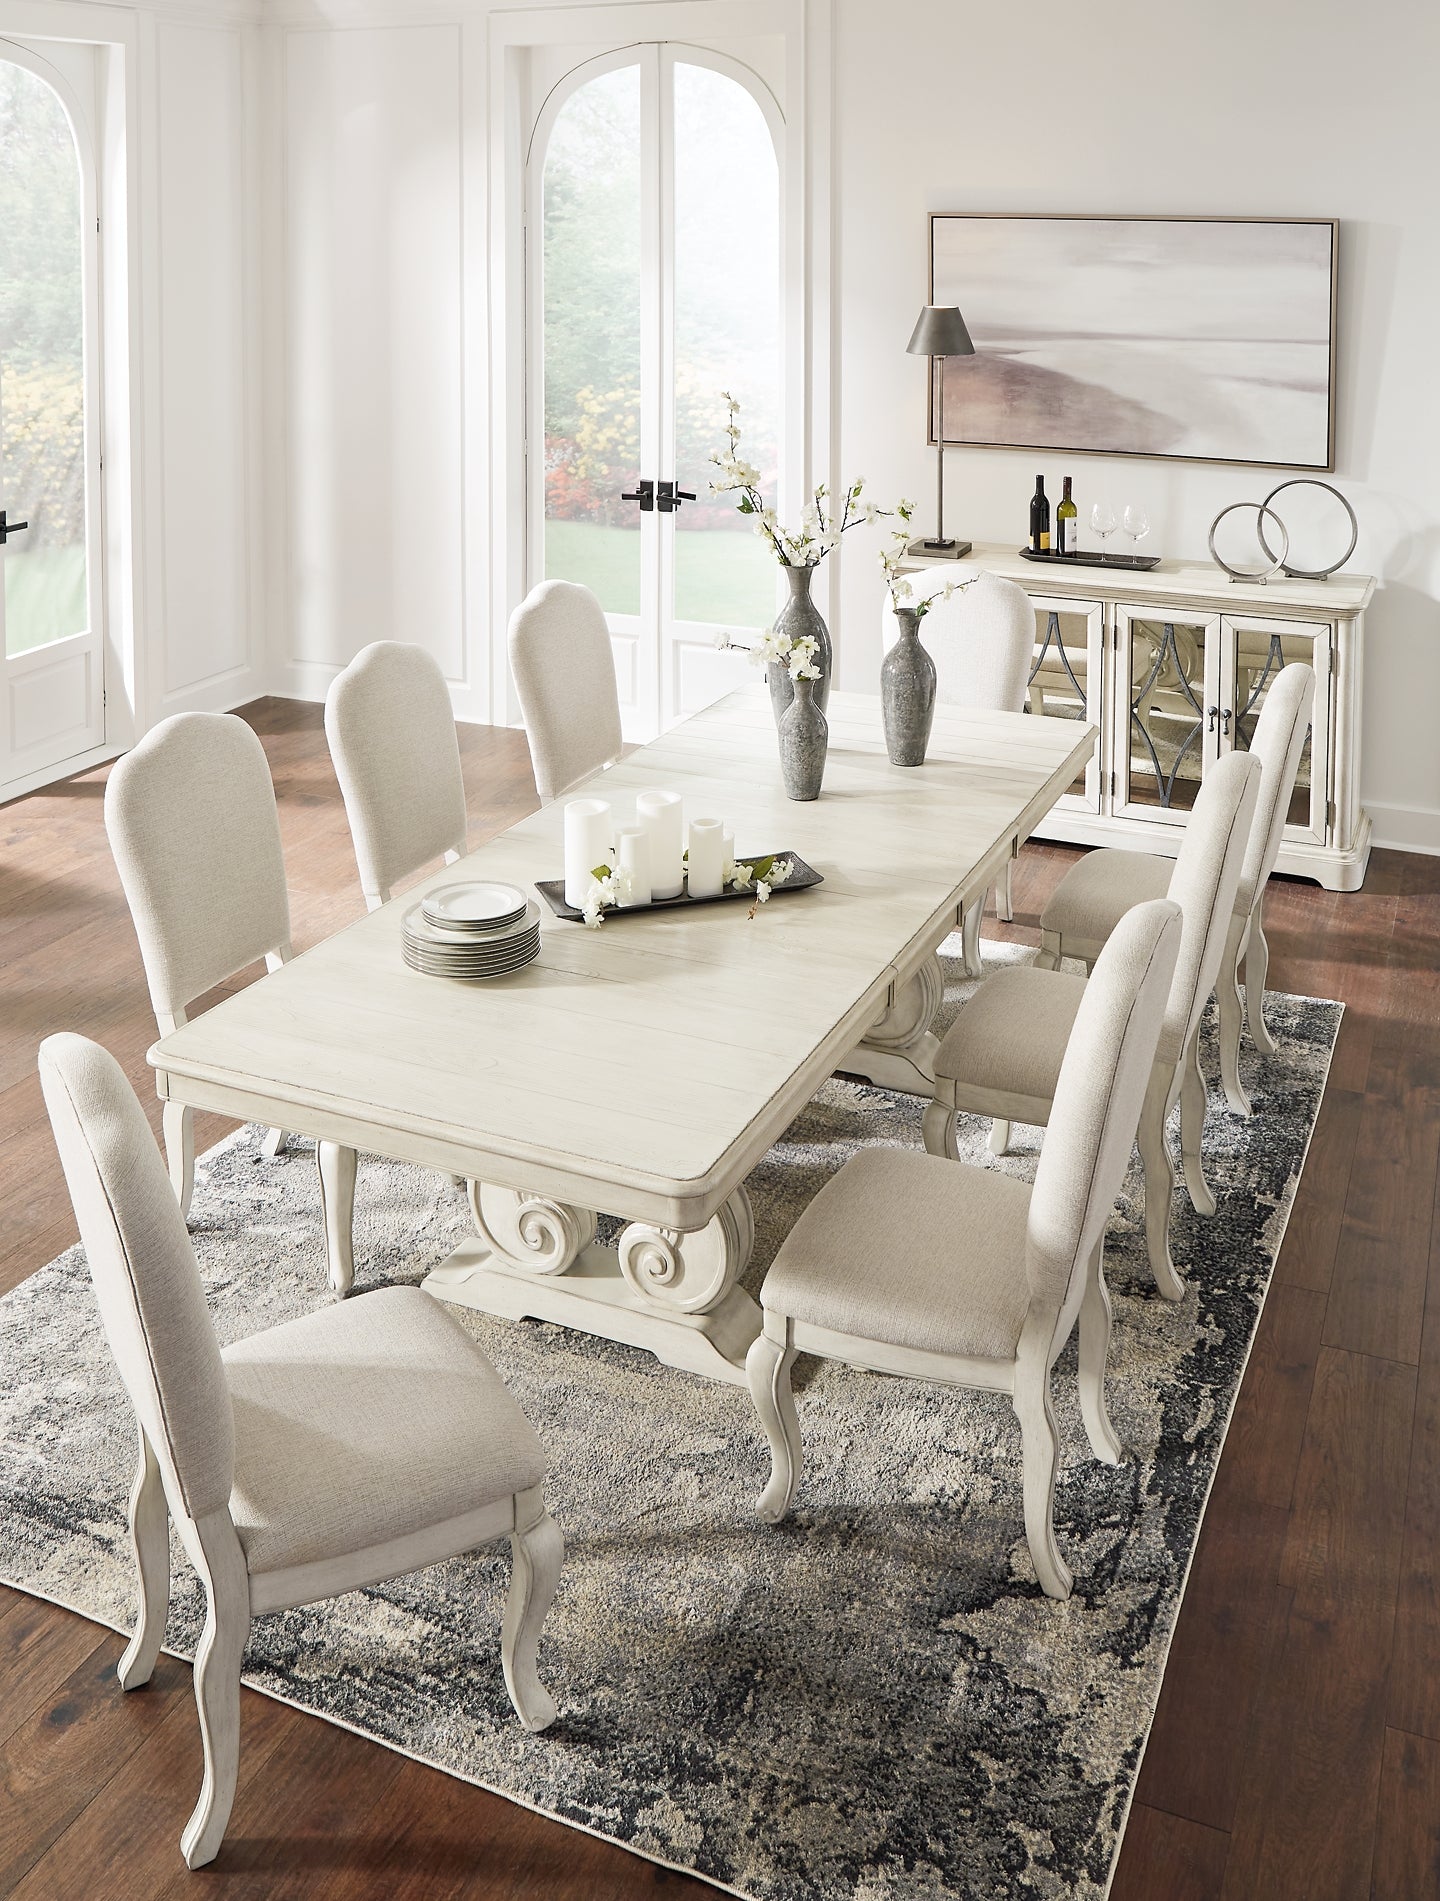 Arlendyne Dining Table and 8 Chairs at Walker Mattress and Furniture